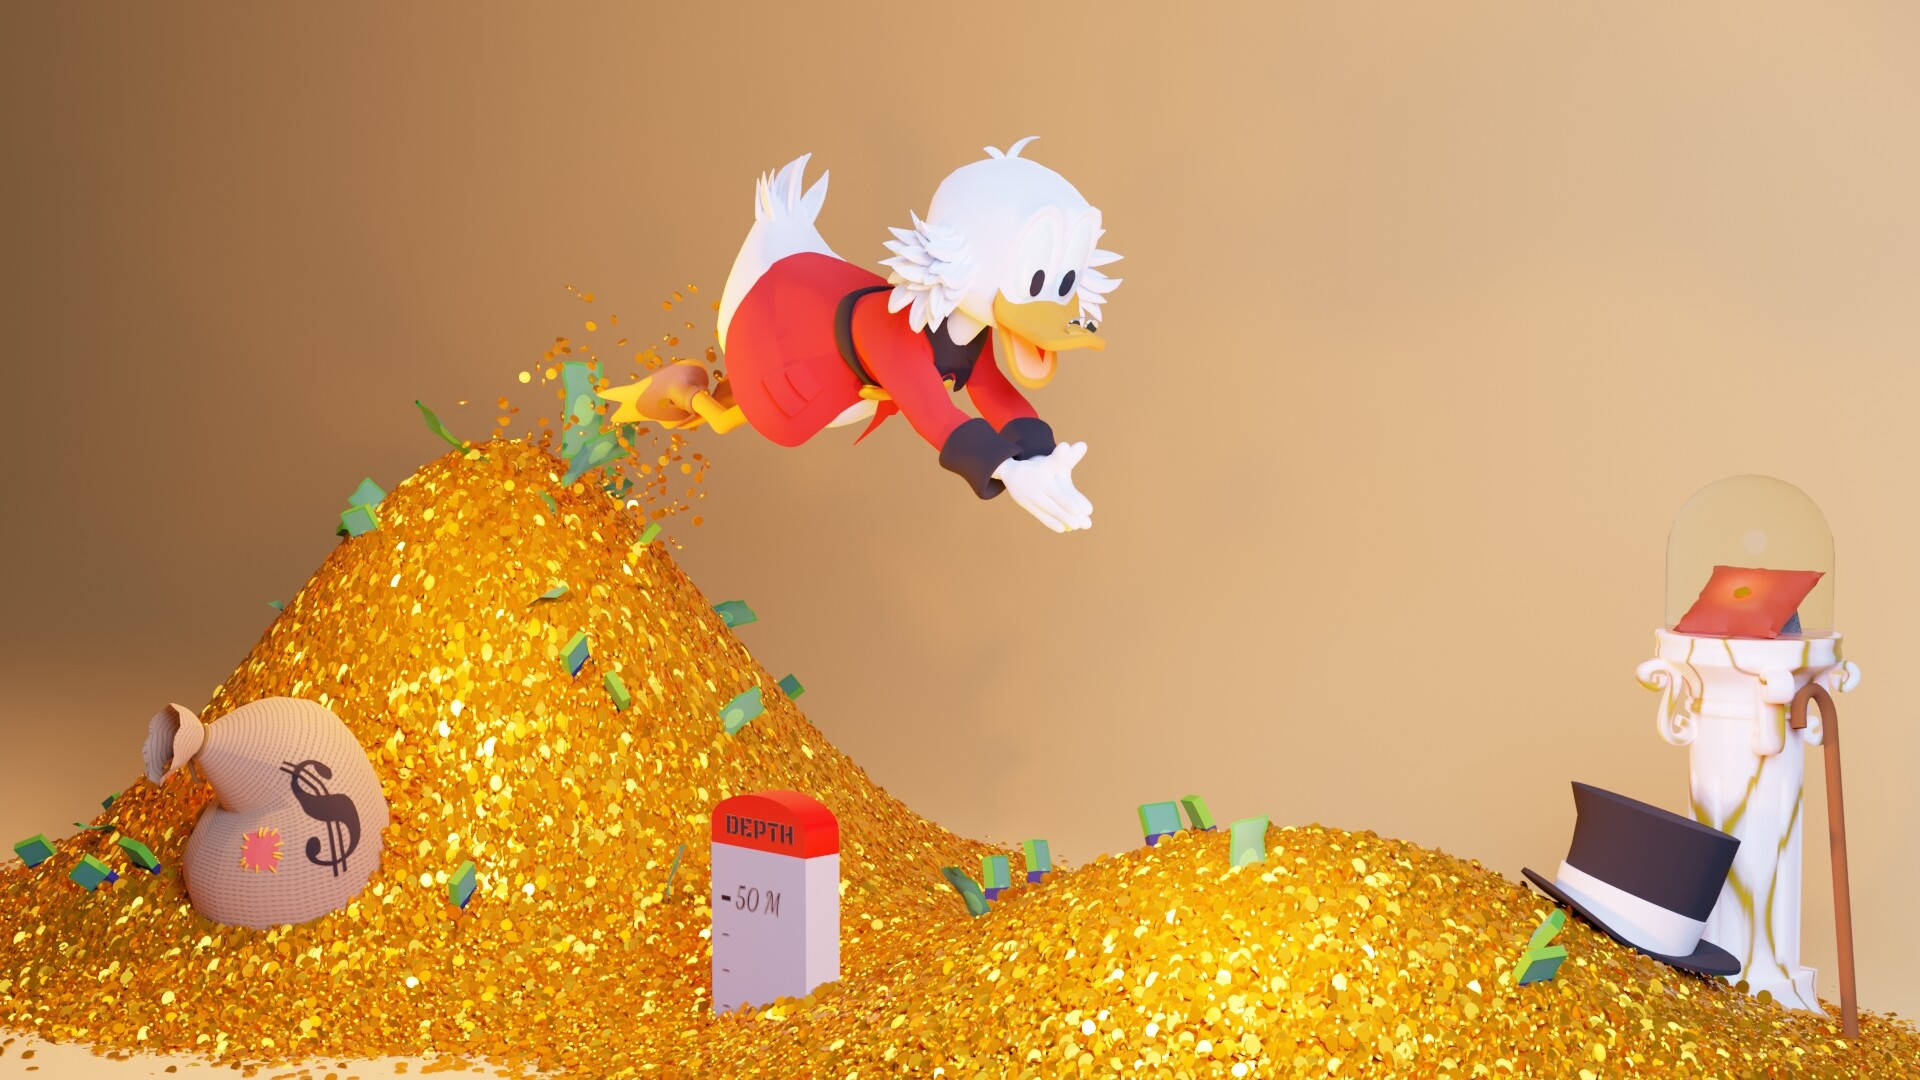 1920x1080 Download Scrooge Mcduck In Mountains Of Gold Wallpaper